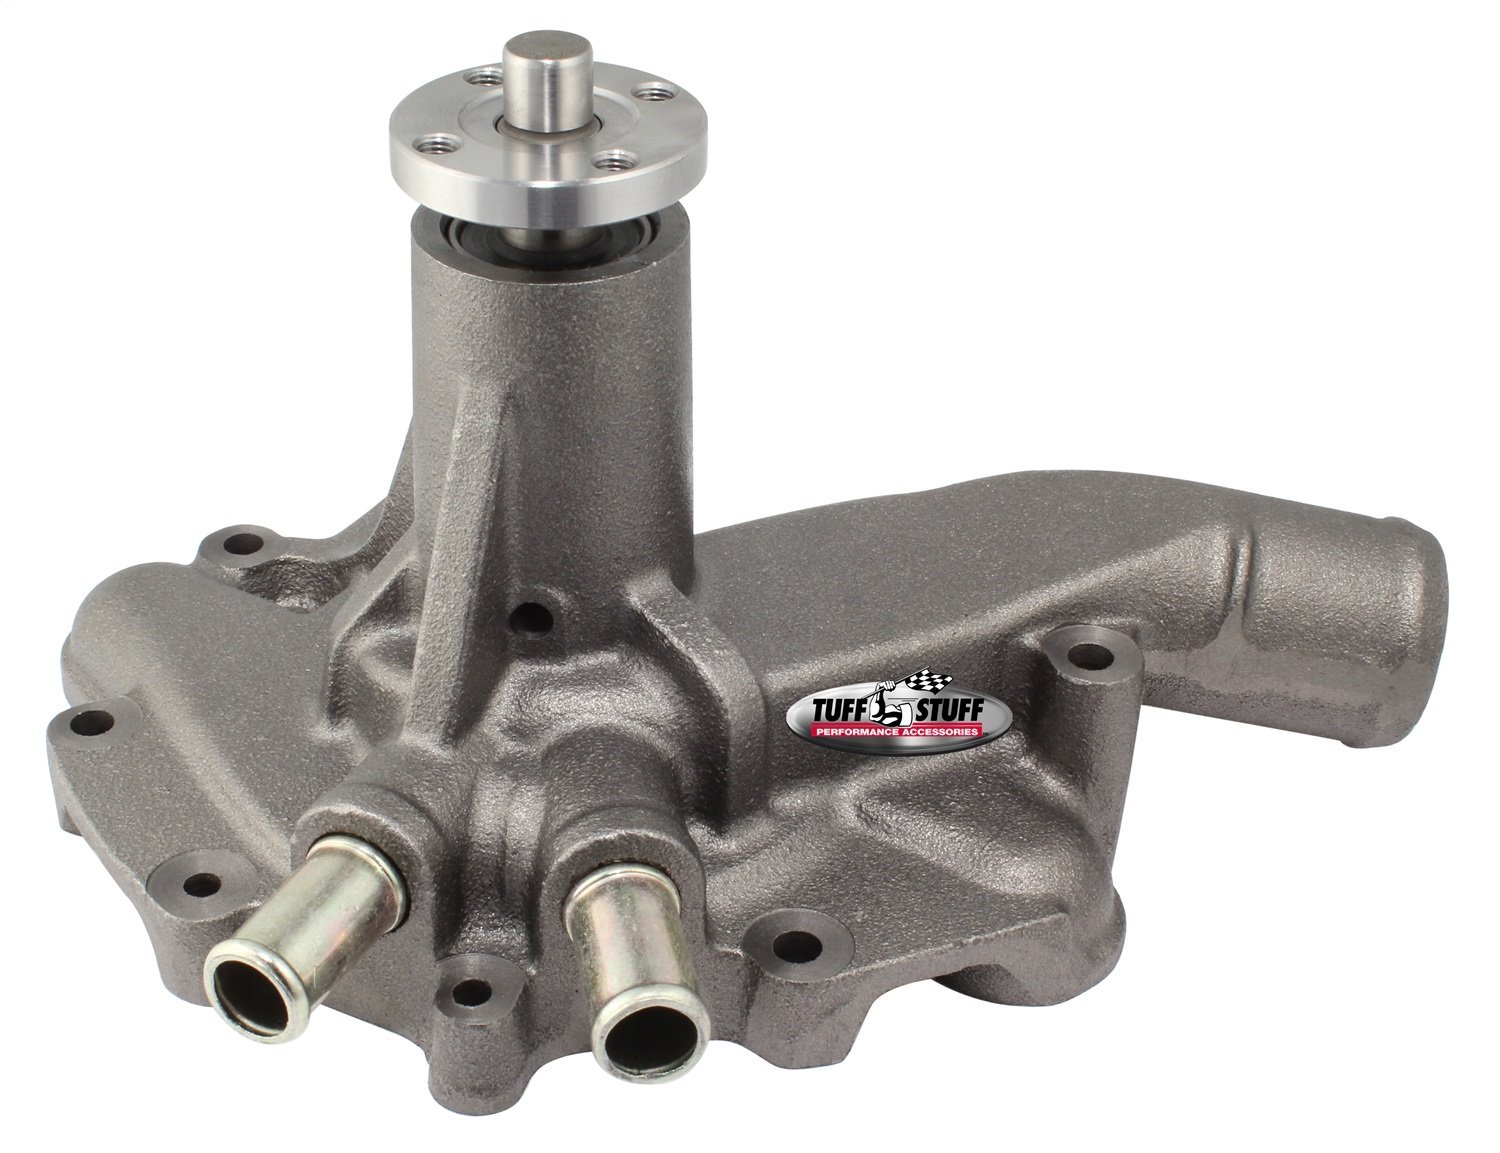 Standard Water Pump As Cast 1971-90 Oldsmobile/Buick Small Block